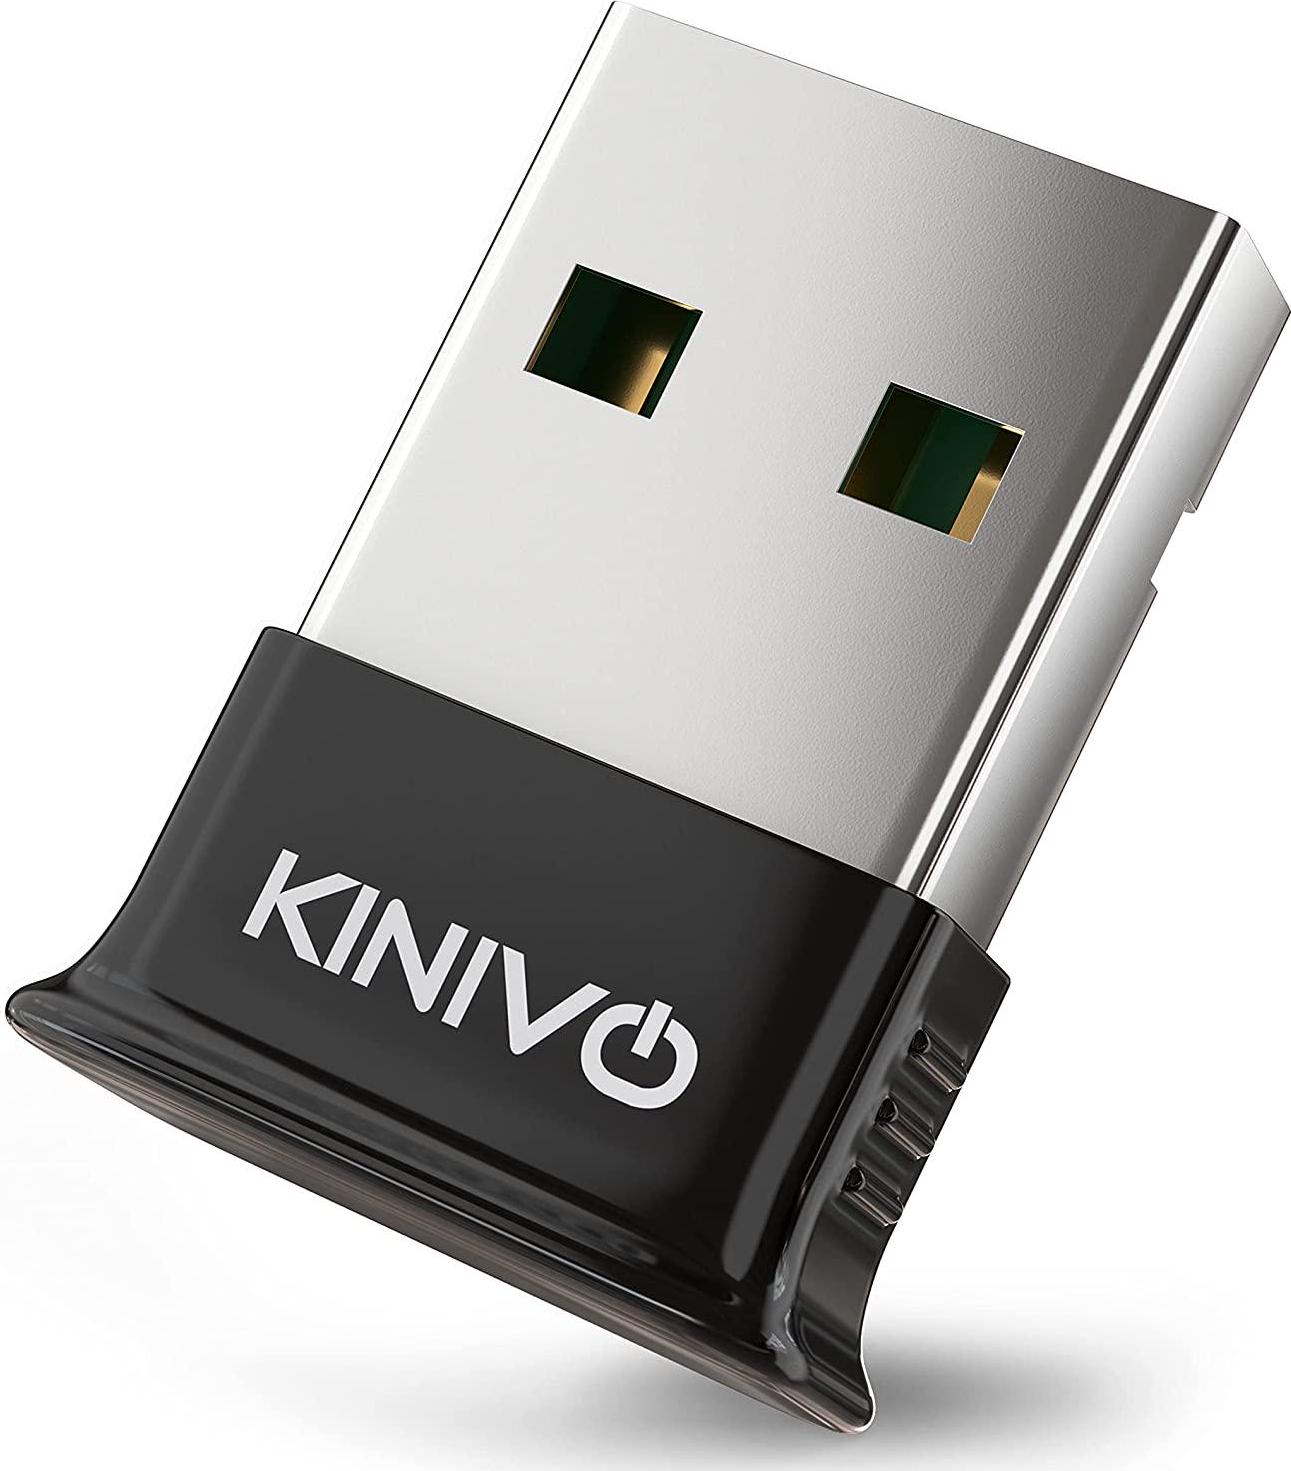 Kinivo, Kinivo BTD-400 USB Bluetooth Adapter (Bluetooth Dongle 4.0, Low Energy, Compatible with Windows, Raspberry Pi, Linux) for PC, Laptop, Mouse, Keyboard, Speaker, Headset